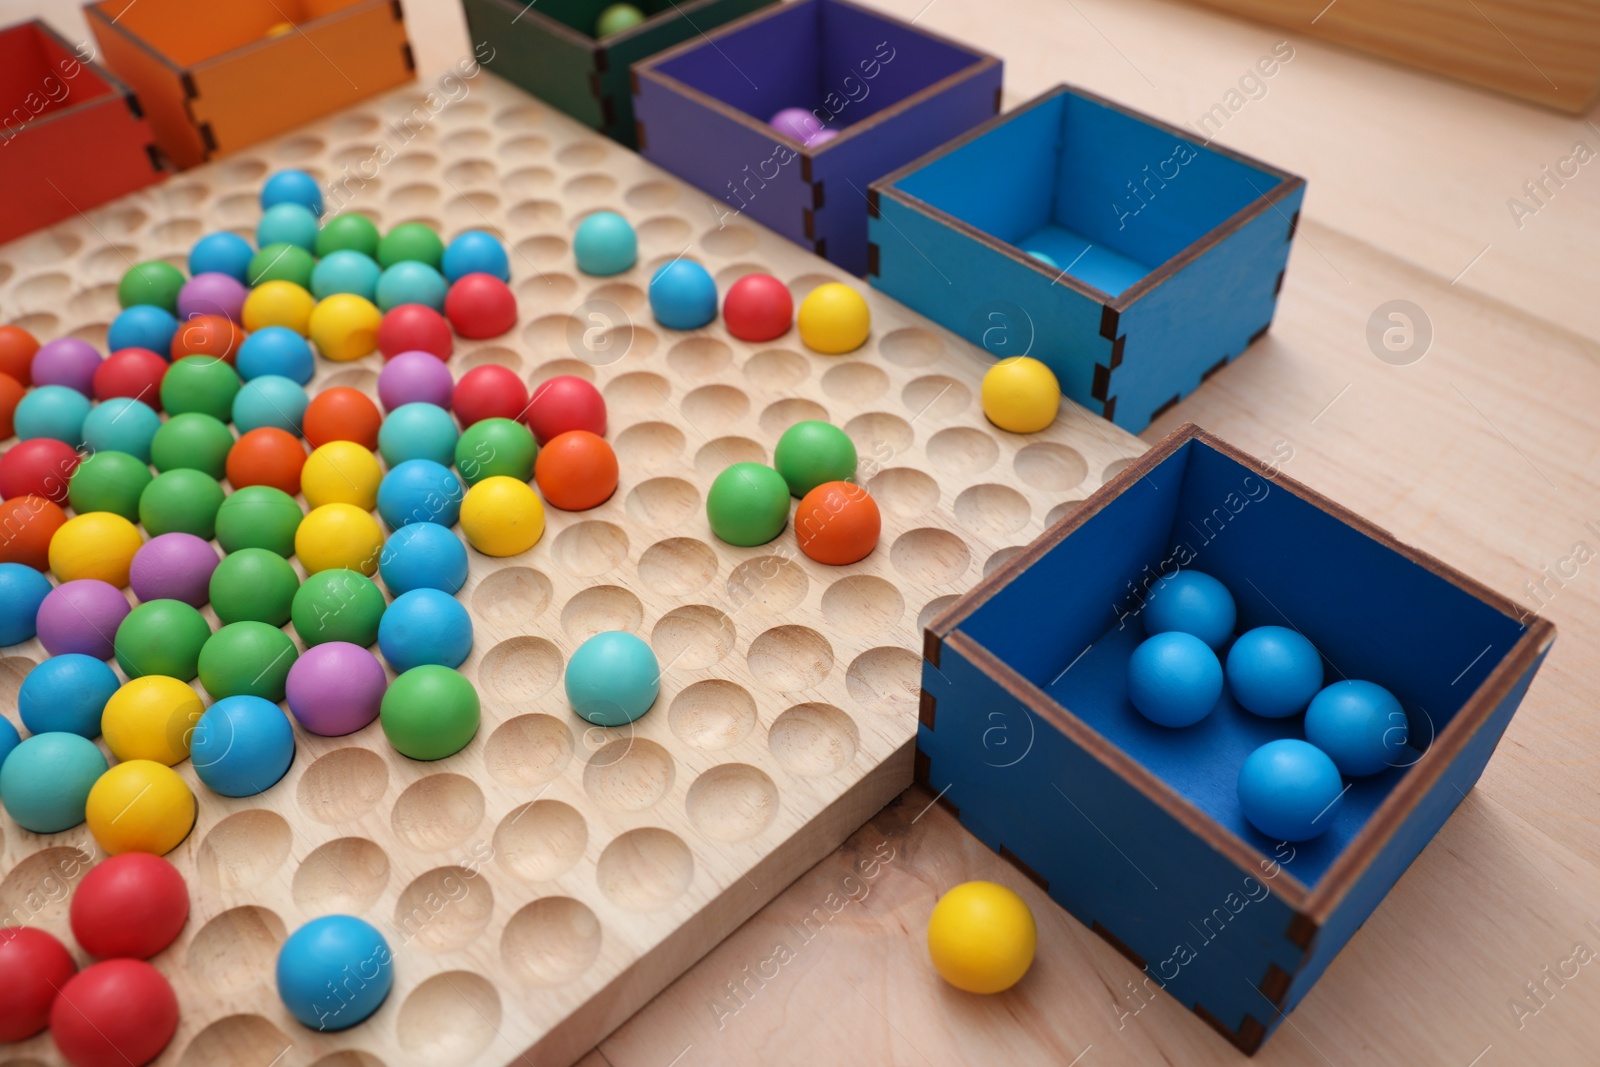 Photo of Wooden sorting board and boxes with colorful balls on table, closeup. Montessori toy